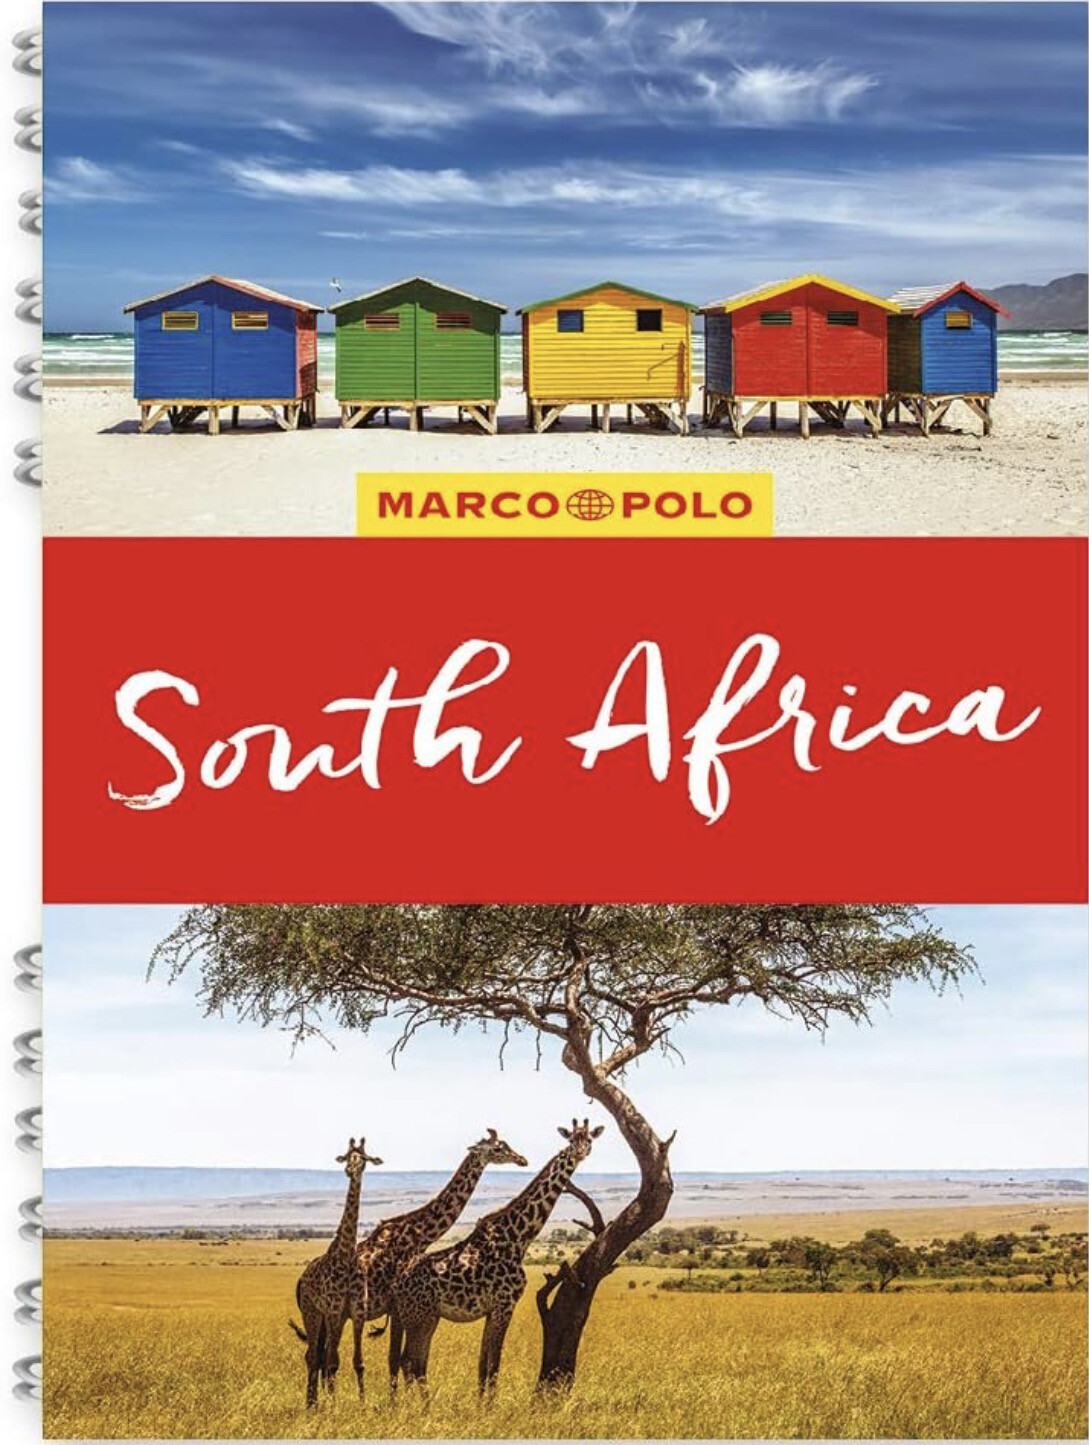 Marco Polo South Africa